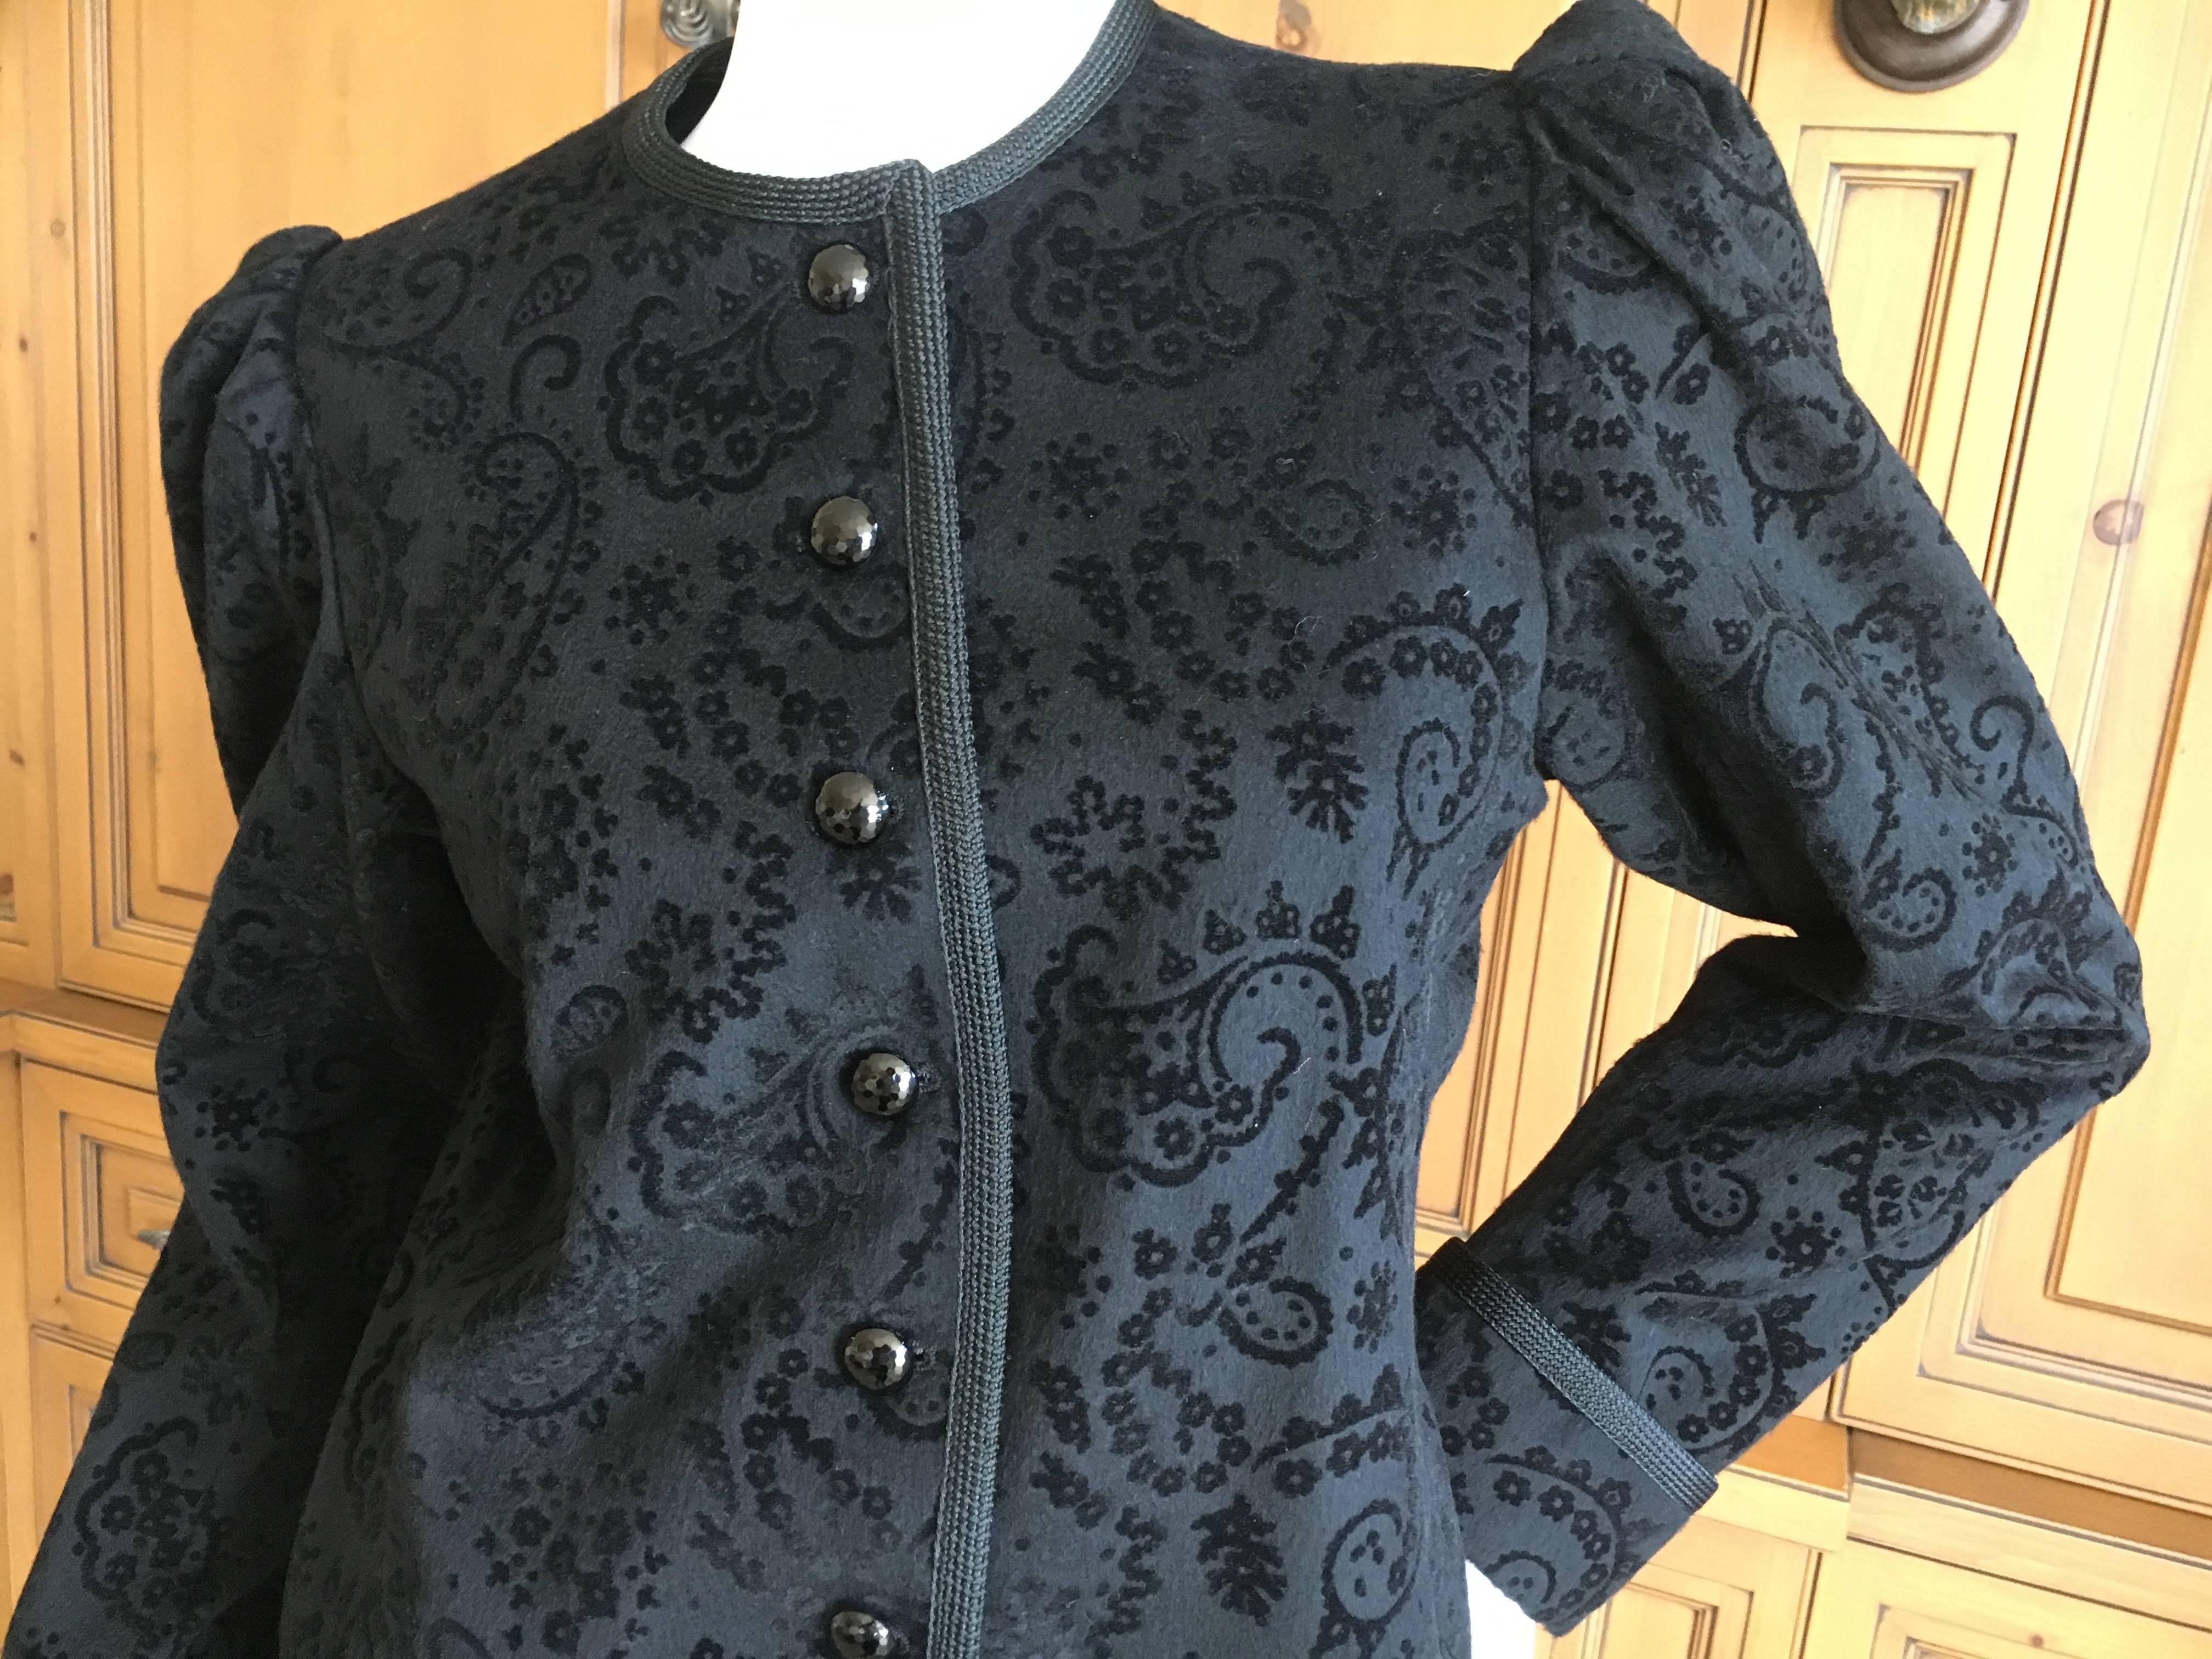 Saint Laurent Rive Gauche 1980 Black Jacket with Jet Buttons and Cord Trim In Excellent Condition For Sale In Cloverdale, CA